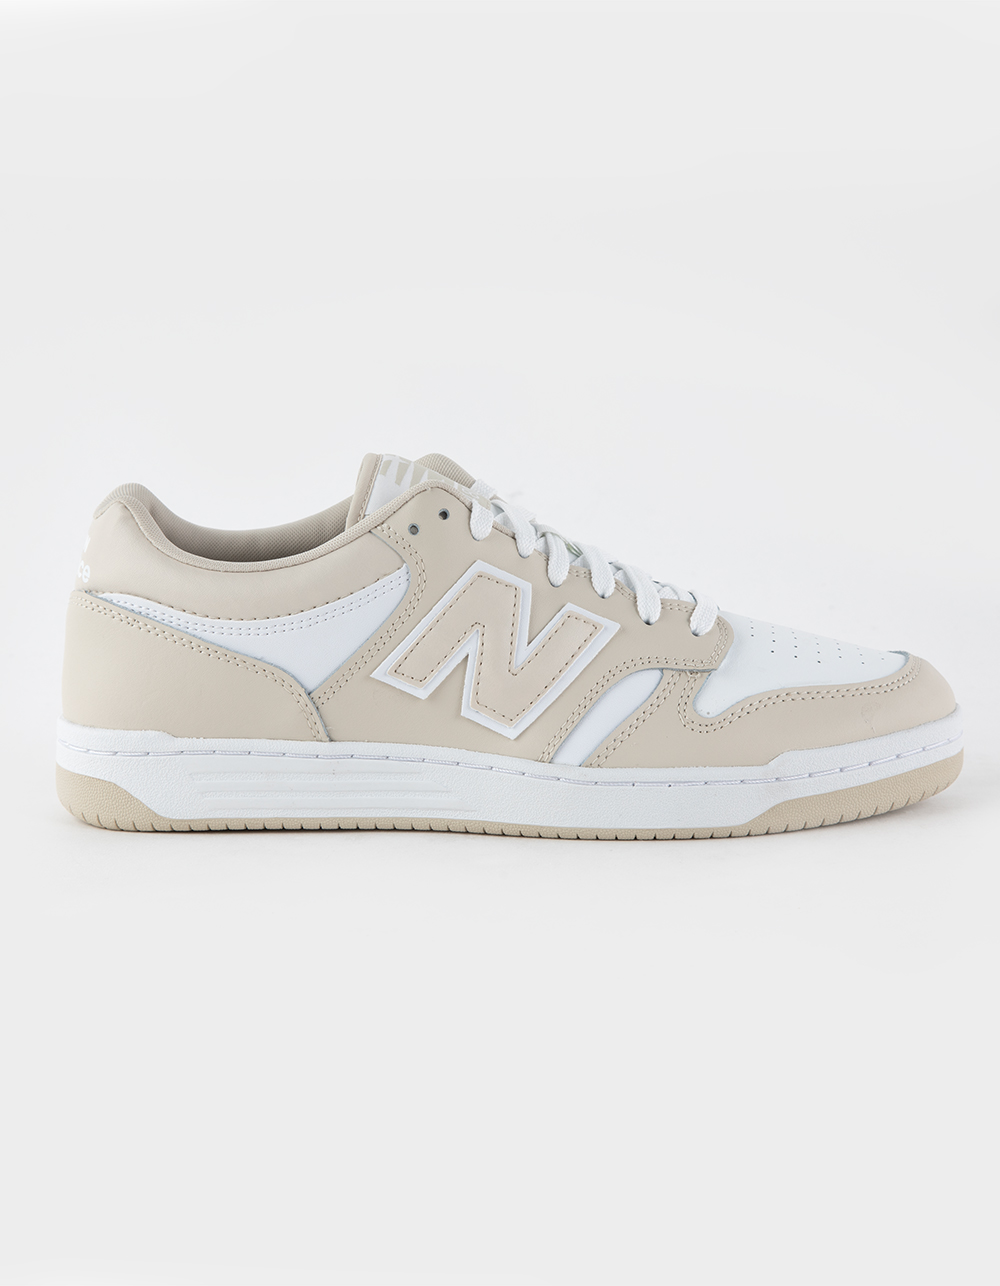 NEW BALANCE 480 Shoes - OFF WHITE | Tillys